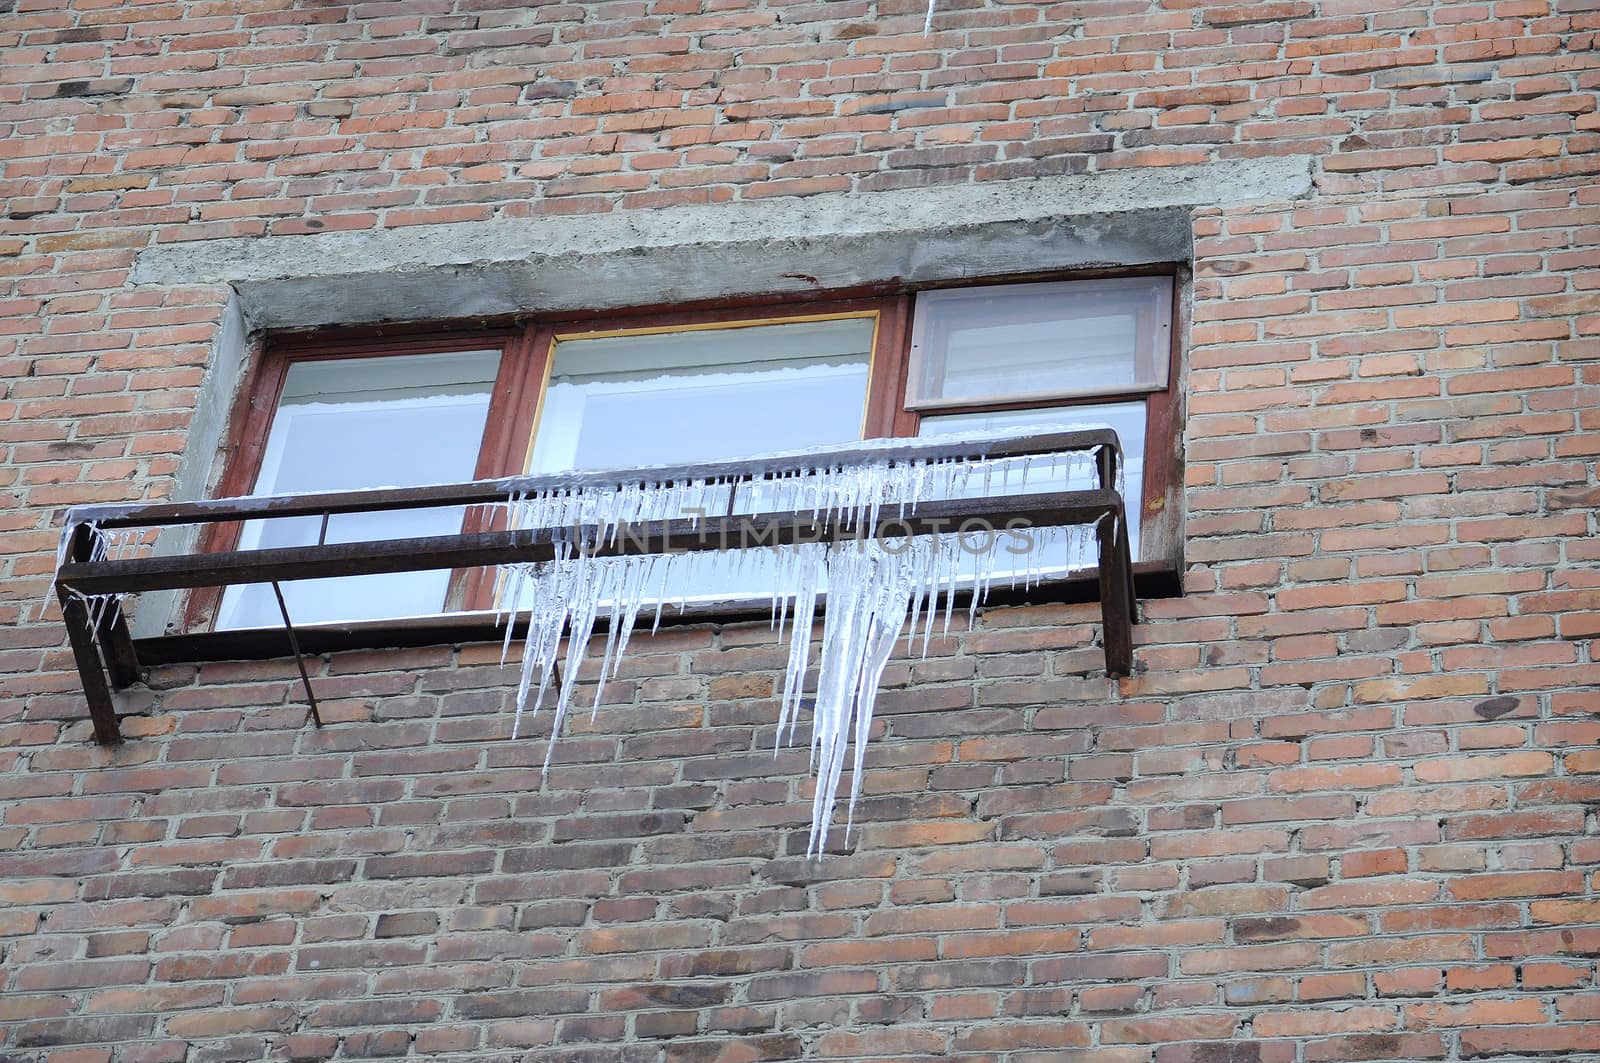 Big icicles at a window, against a brick wall